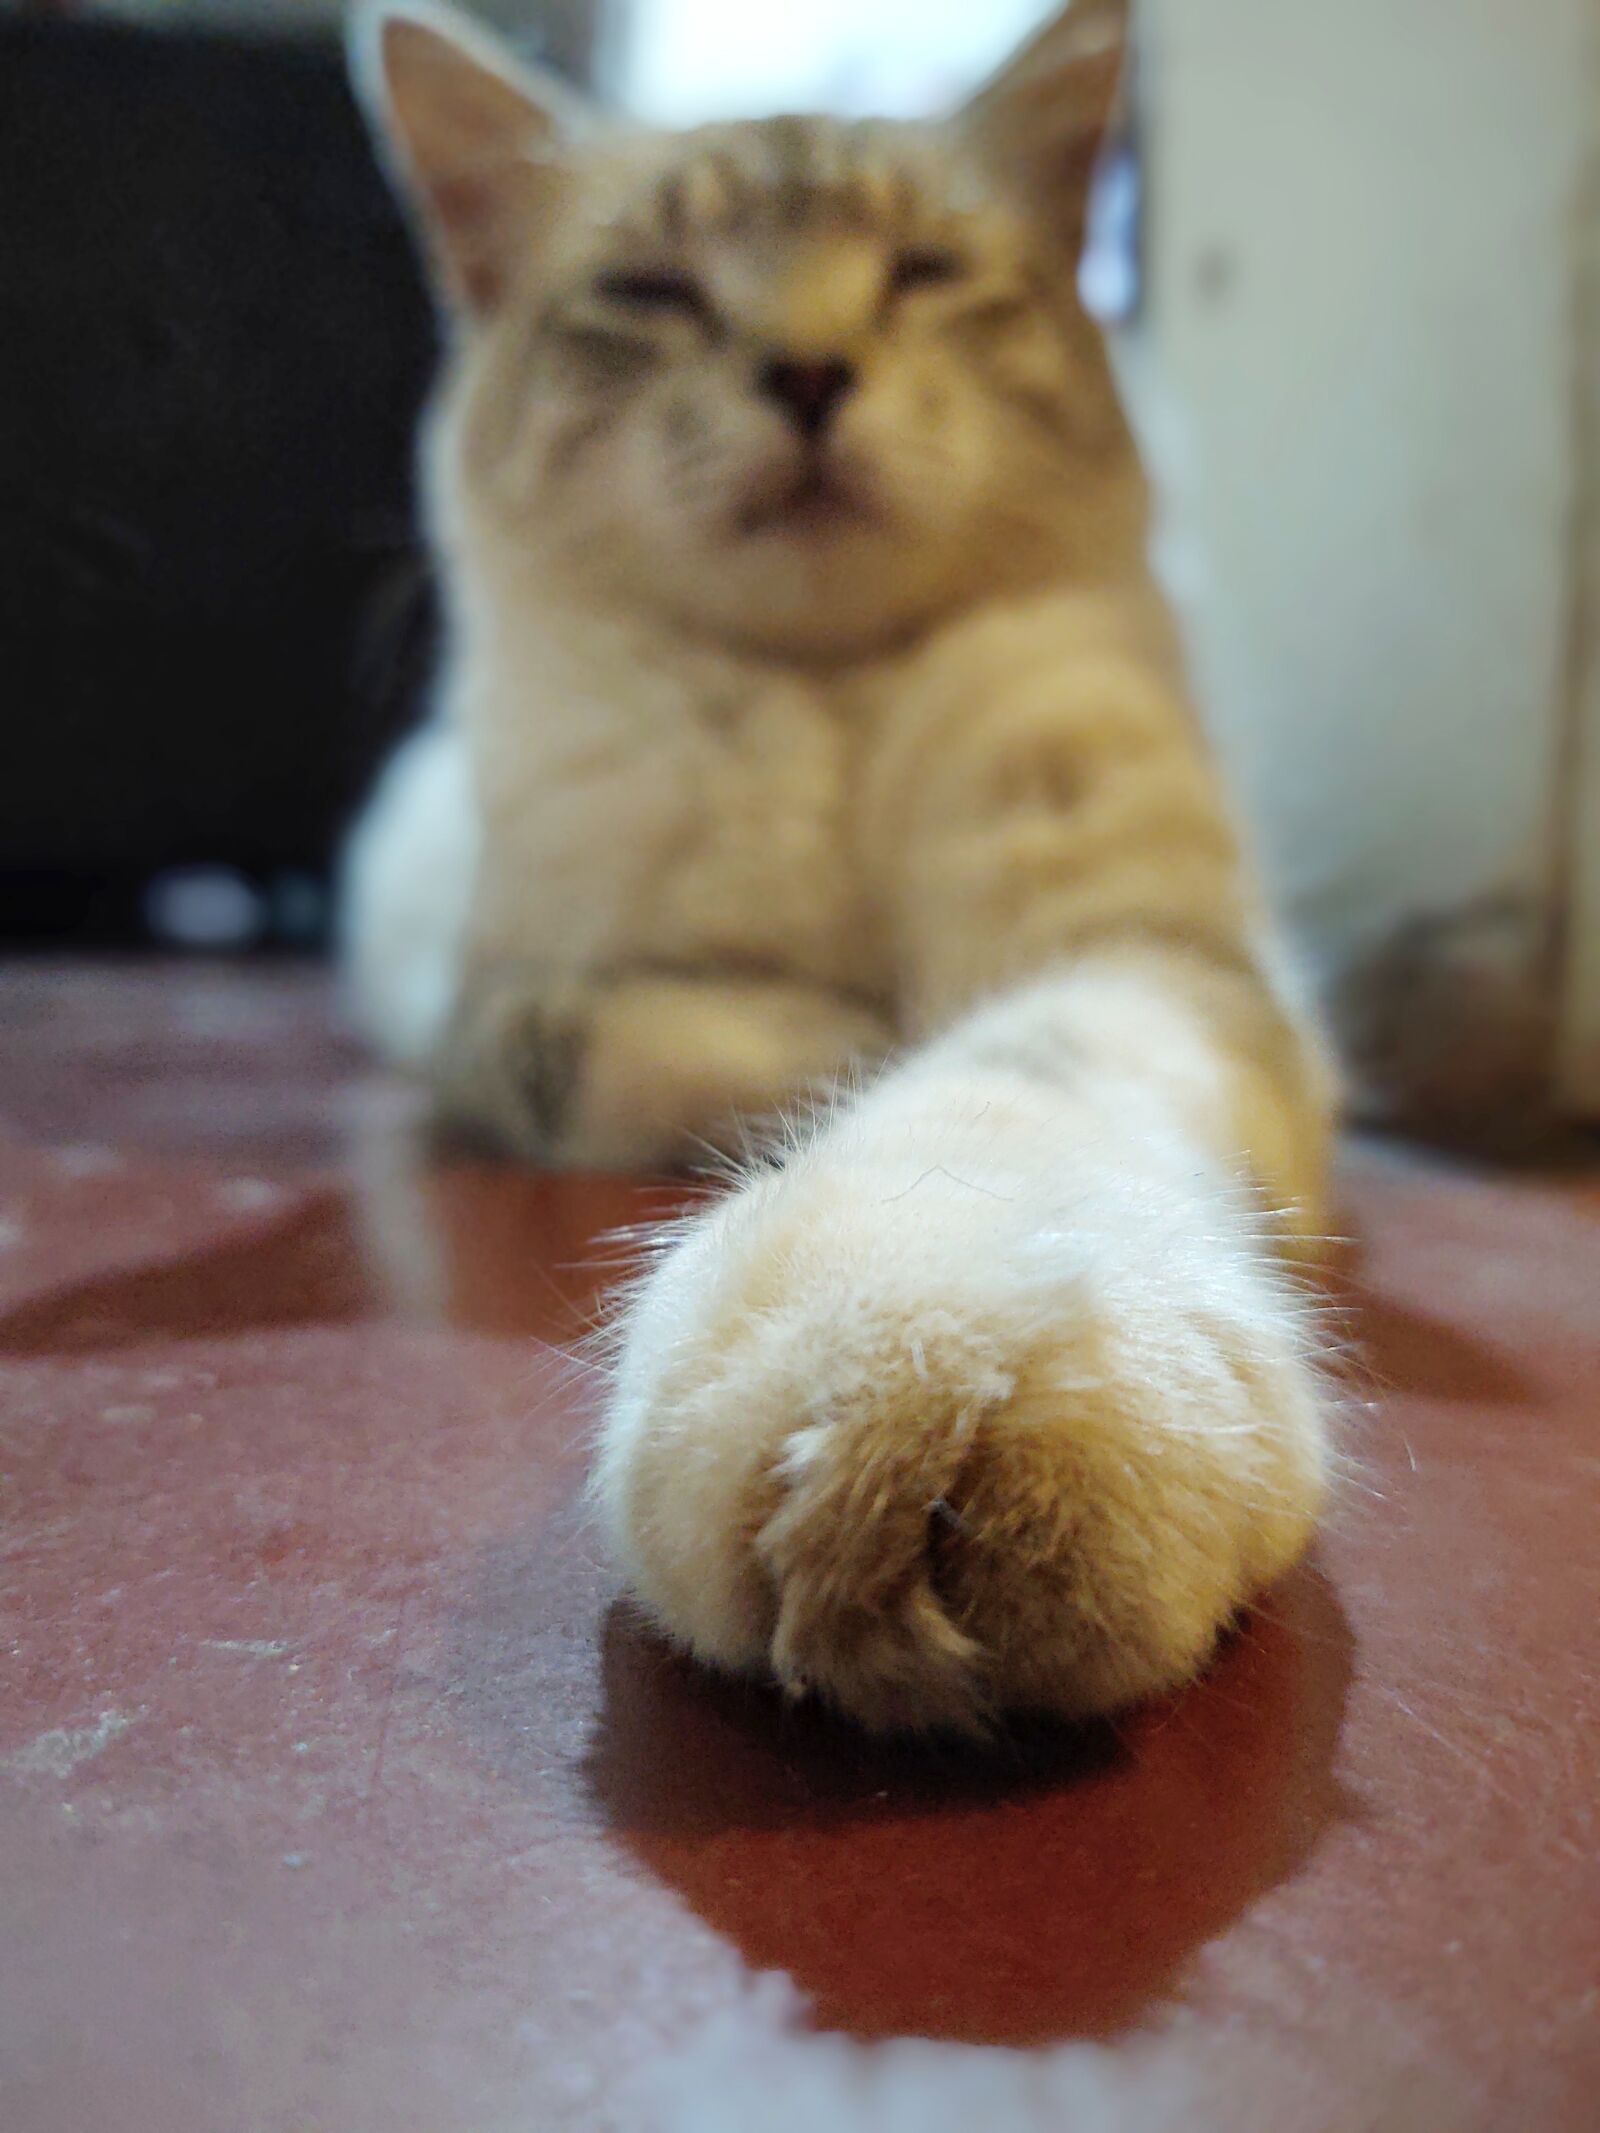 Motorola ONE ZOOM sample photo. The paw of a photography